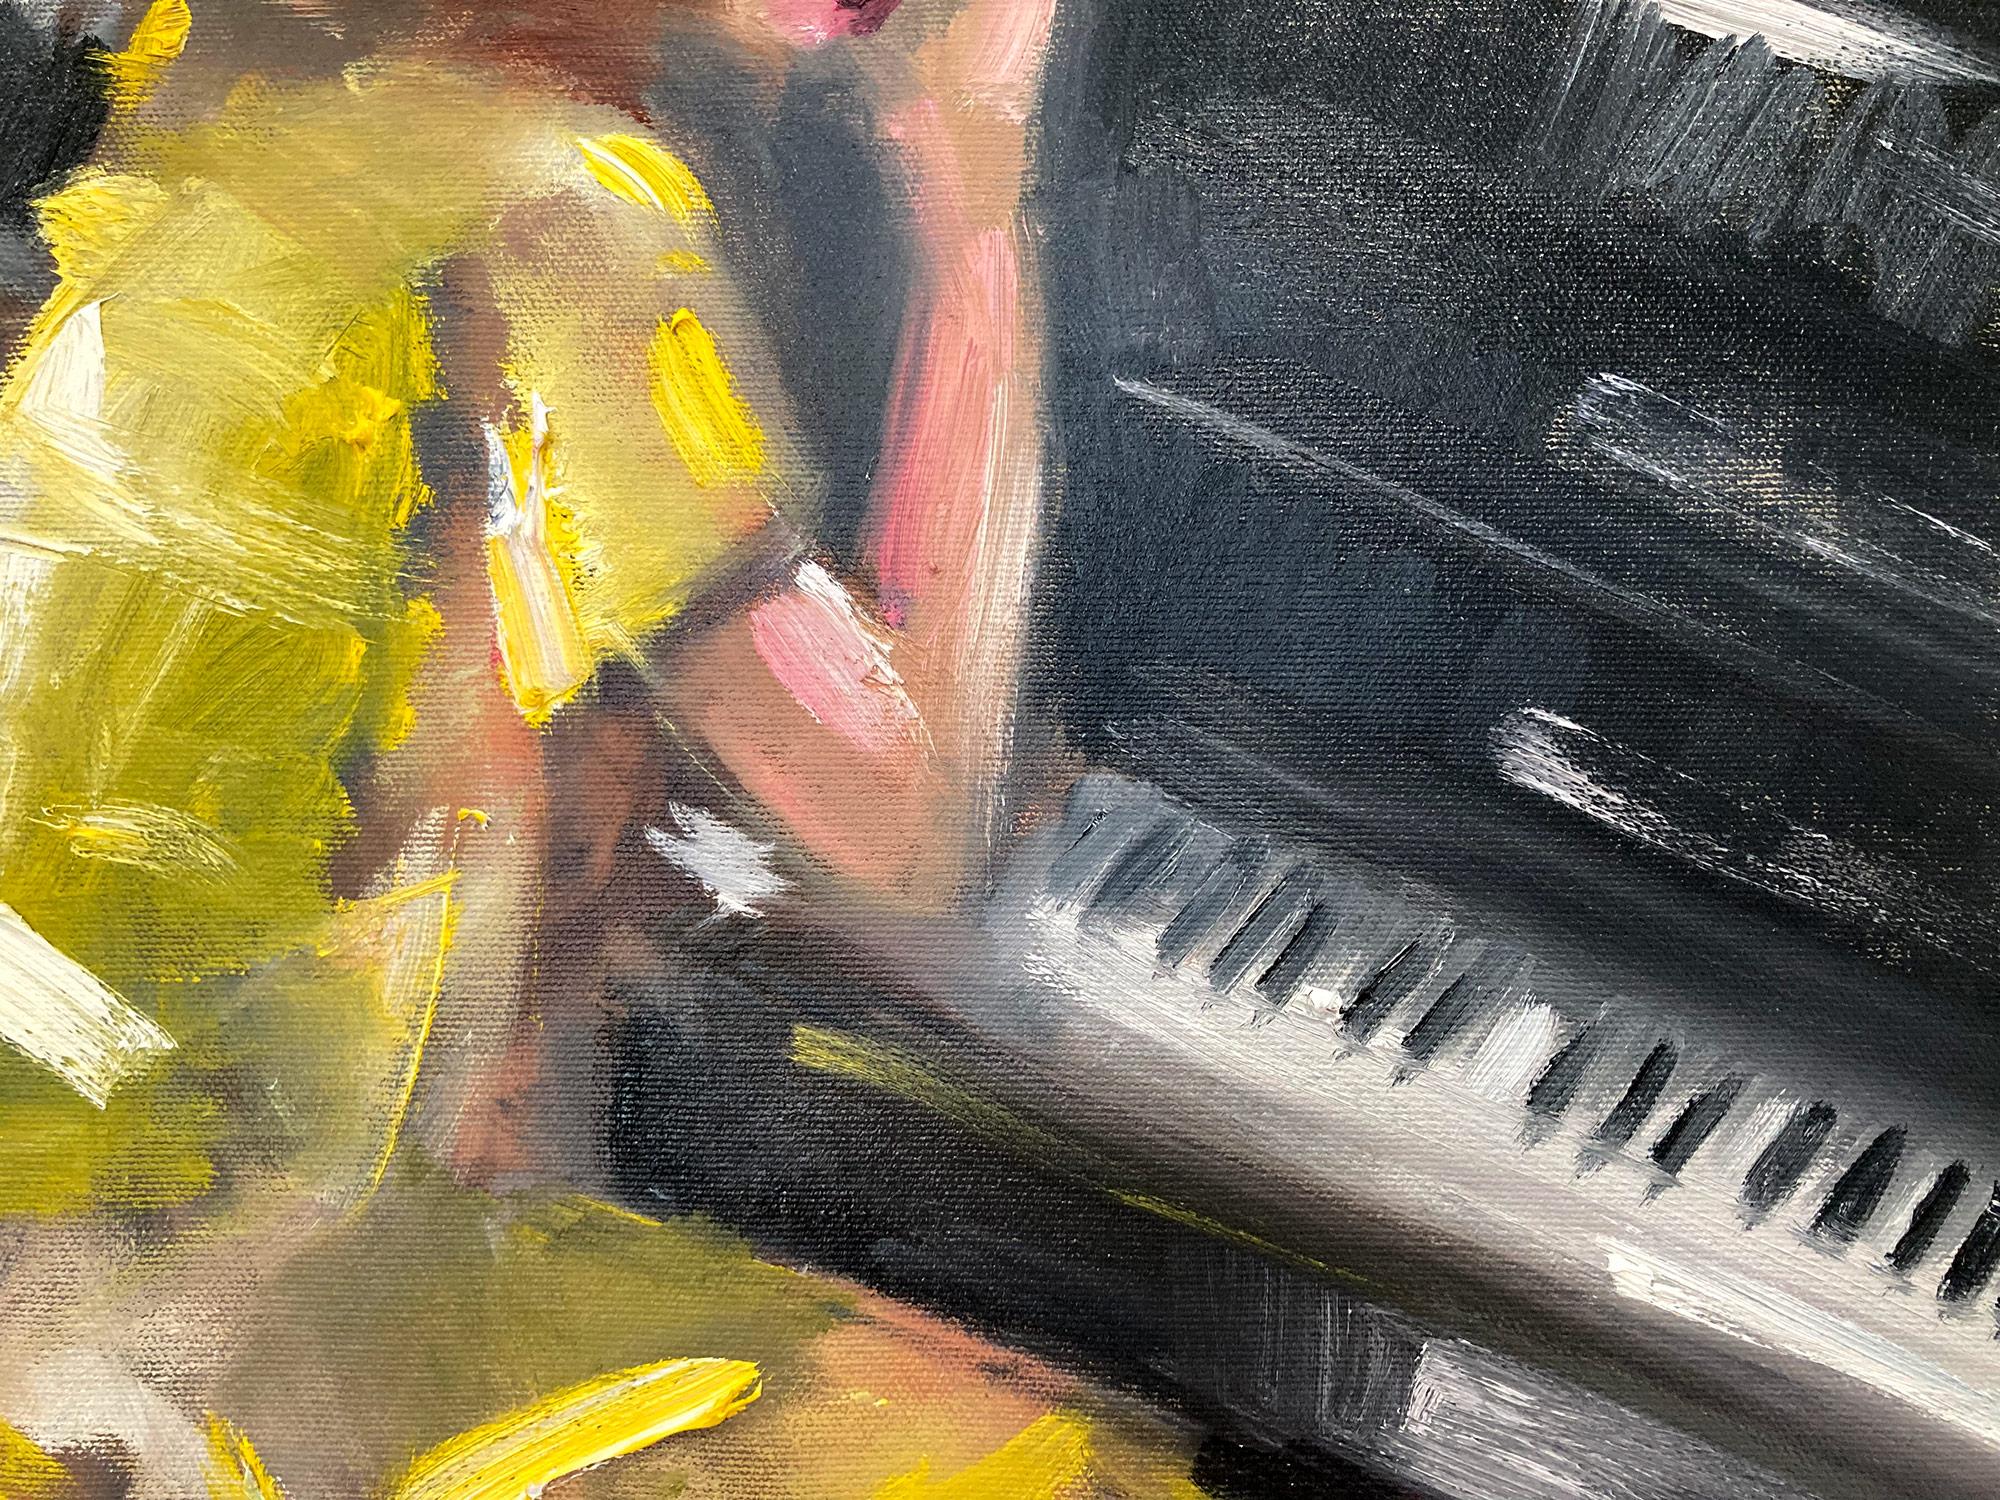 A whimsical depiction of a woman in a yellow dress leaning on a beautiful black baby grand piano in thought. This piece captures the essence of fashion and Haute Couture effortlessly. Done in a very modern and impressionistic style, the colors are